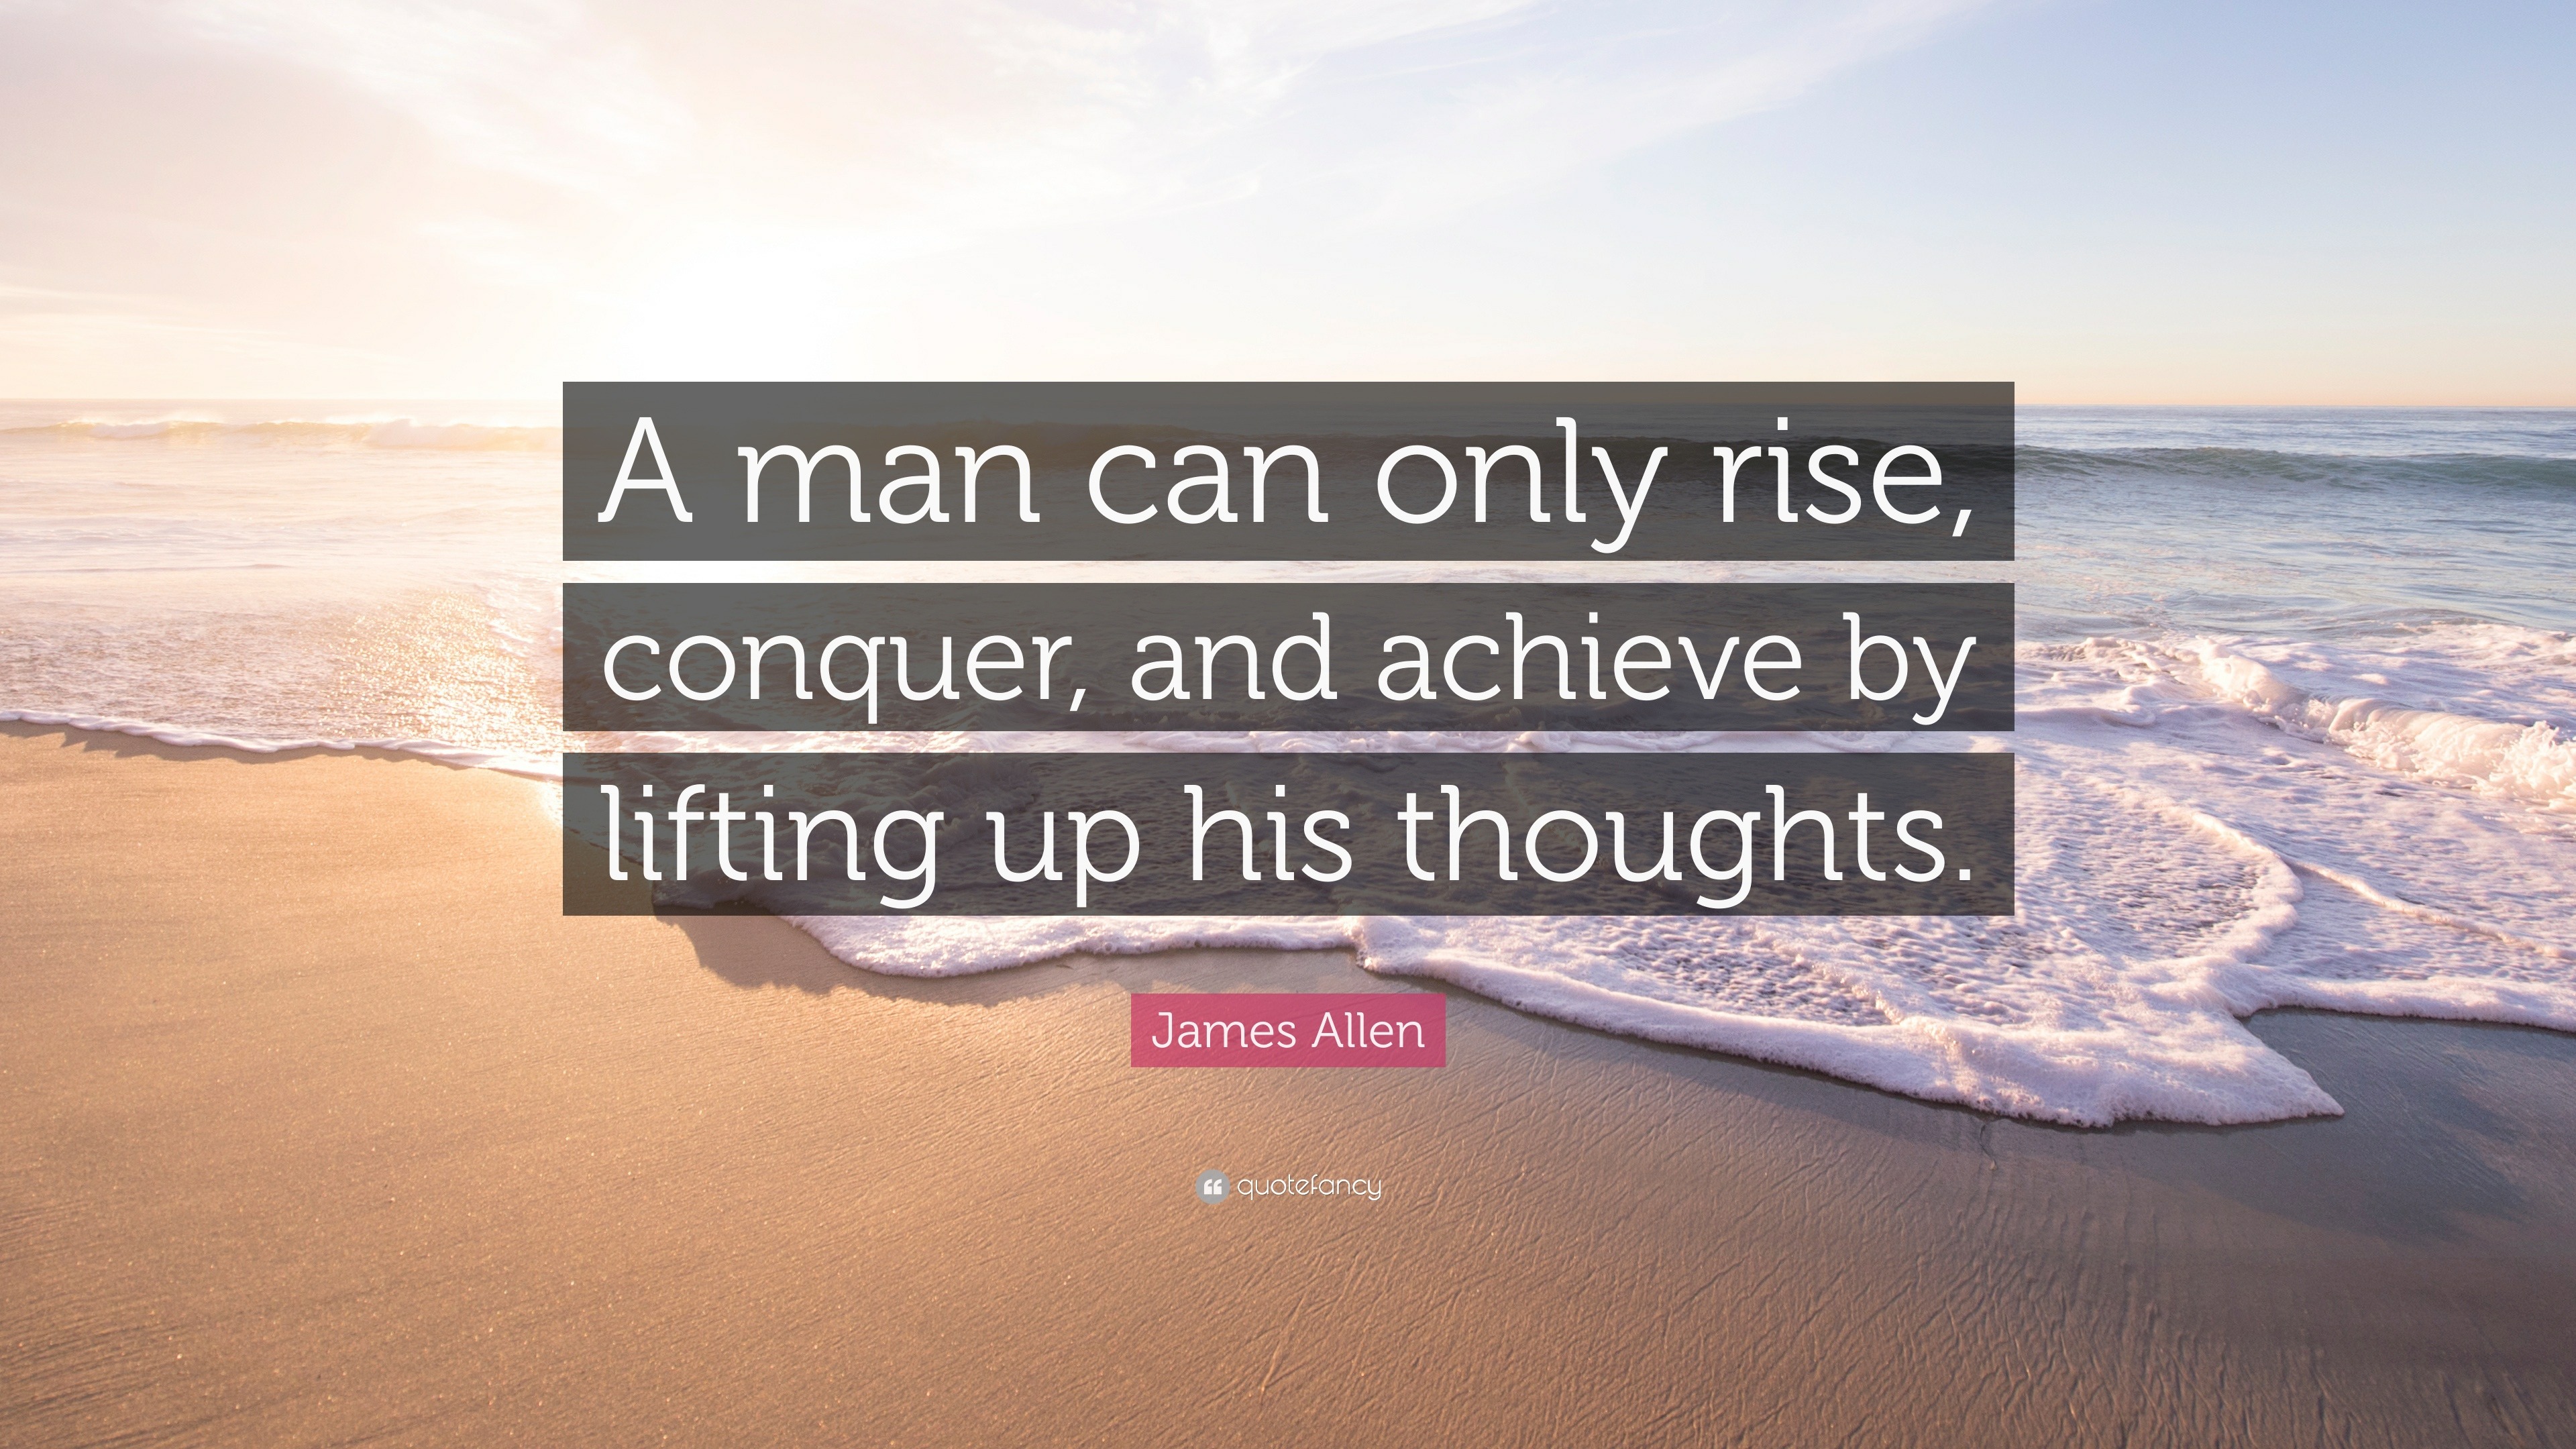 A man can only rise, conquer, and achieve by lifting up his thoughts. 